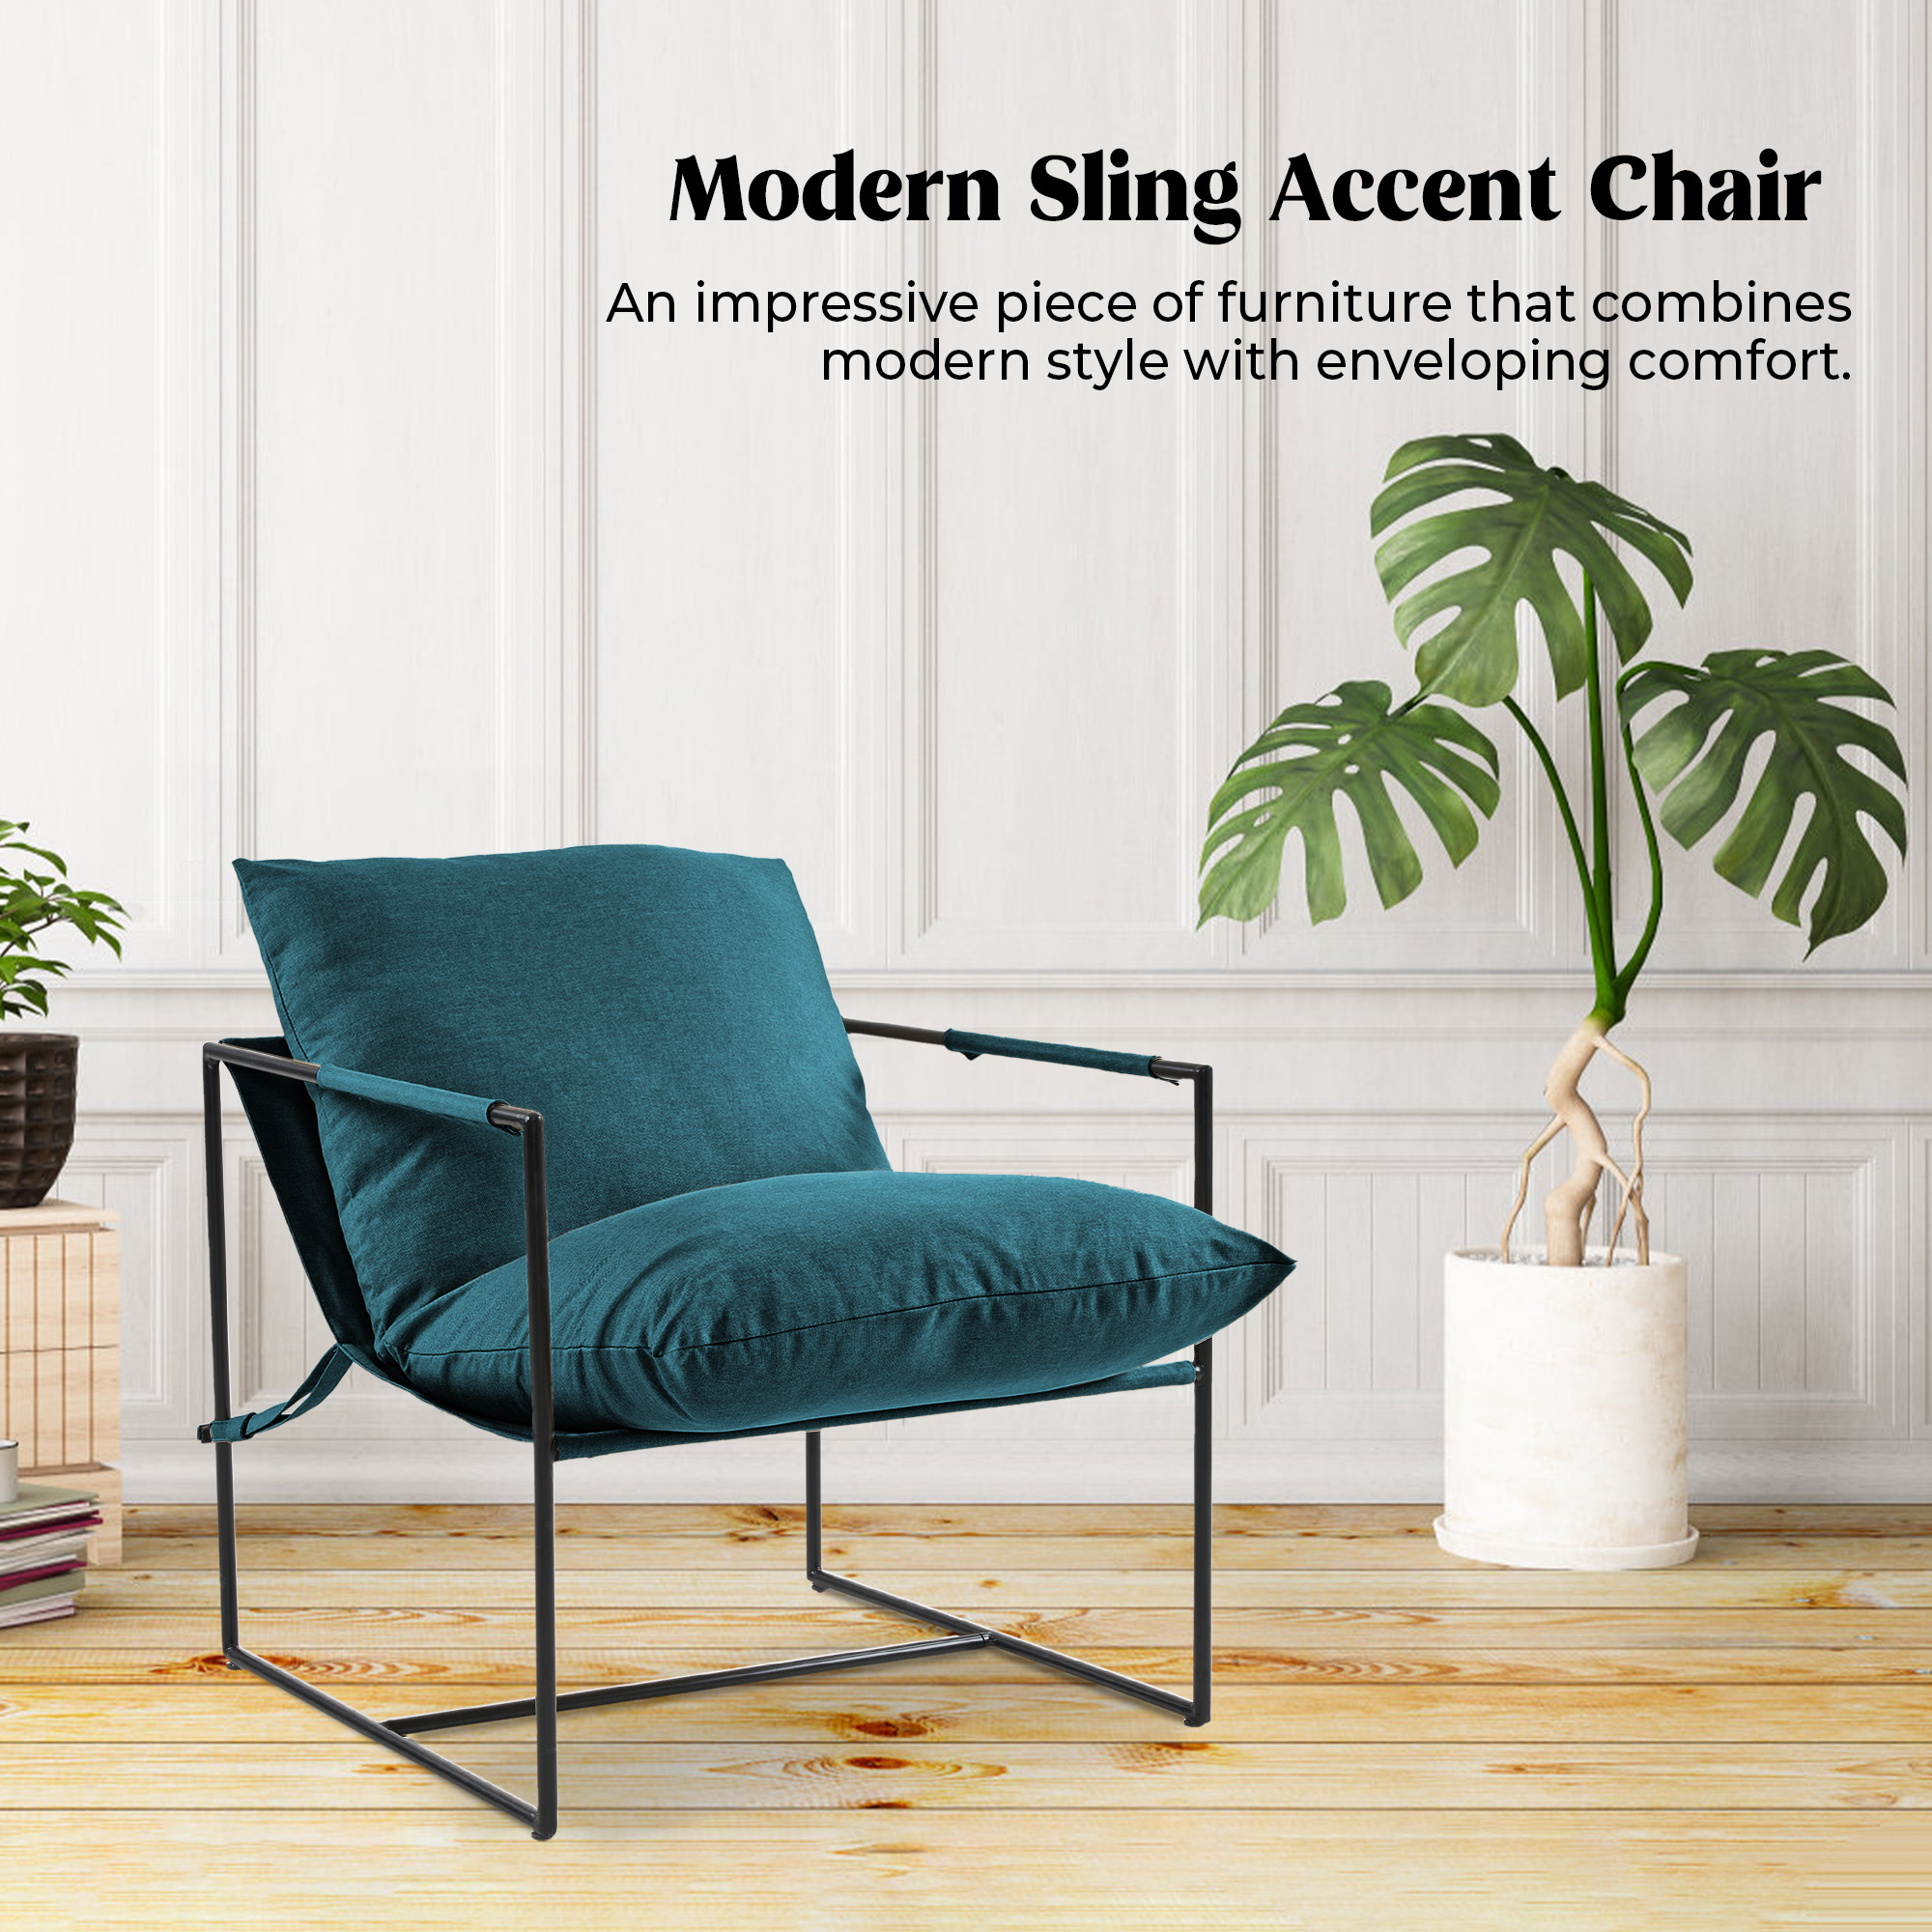 Upholstered Sling Accent Chair With Metal Frame Modern Style, Peacock Blue